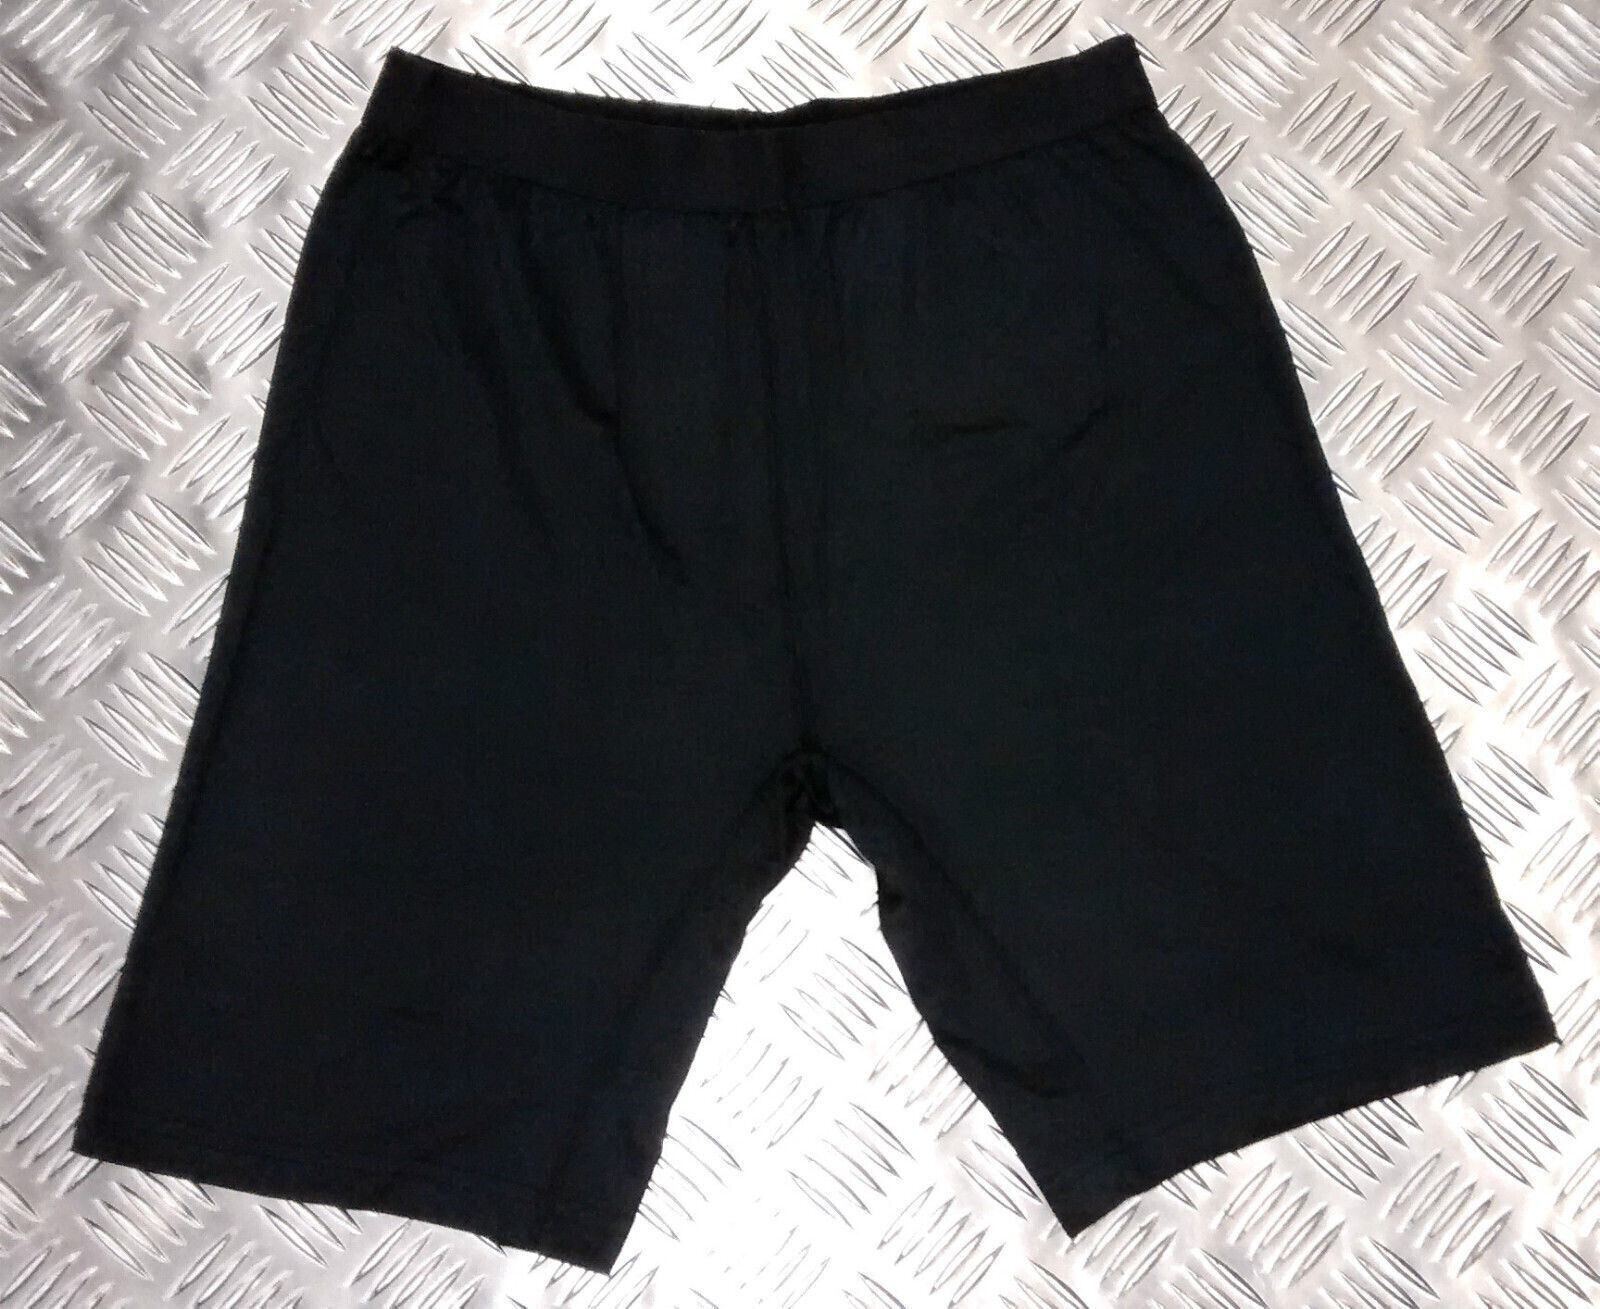 Anti-Microbial Underwear Pant Short Genuine British Armed Forces Size XL - NEW